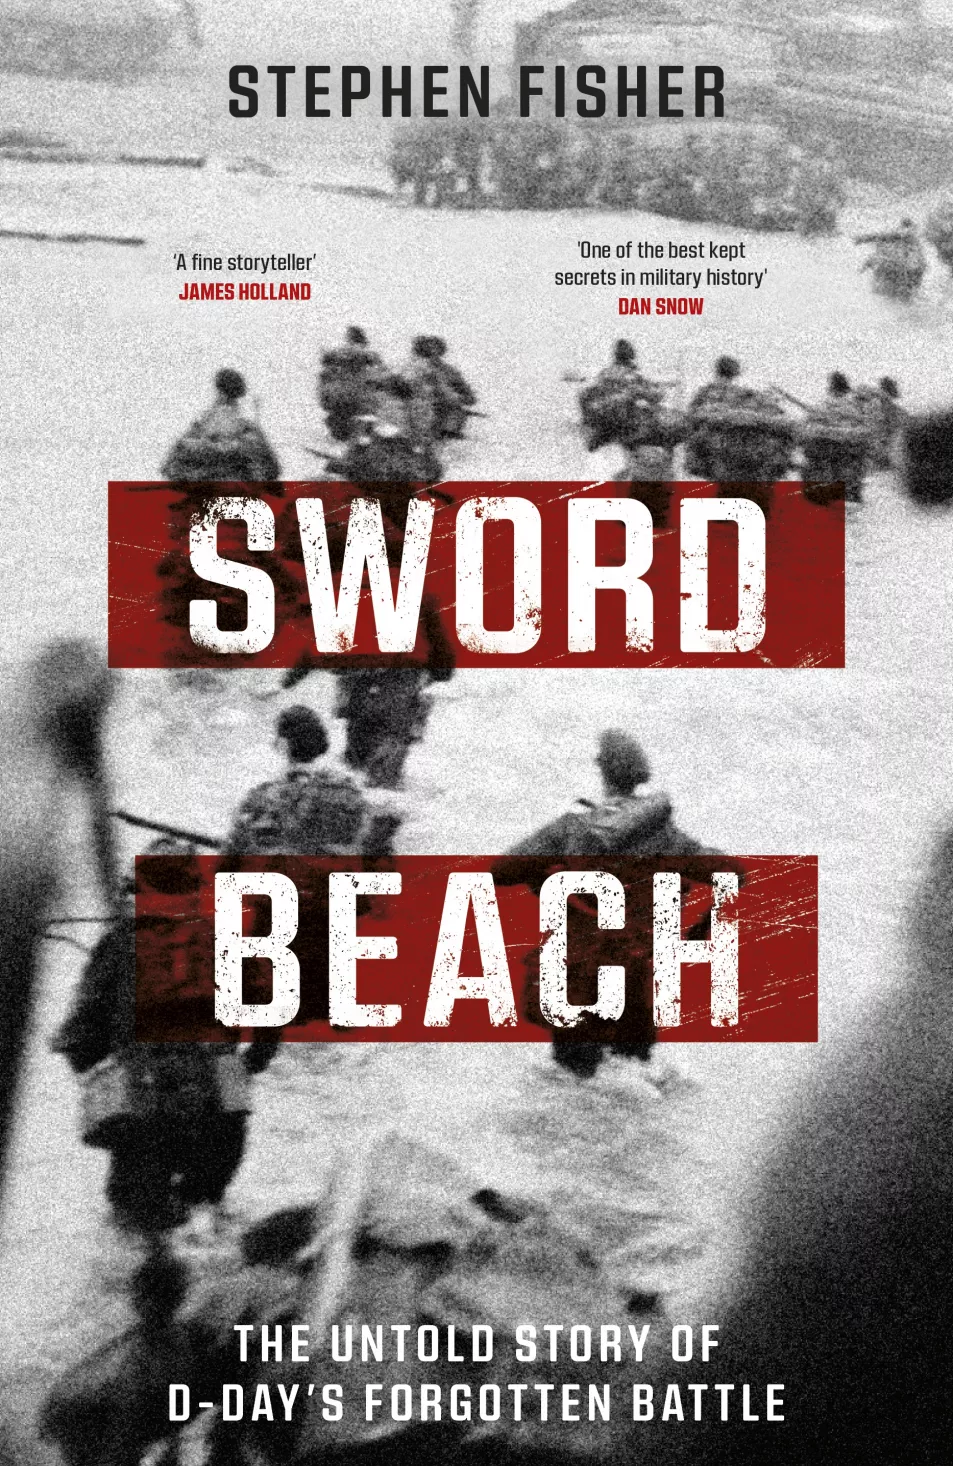 Book jacket of Sword Beach by Stephen Fisher (Bantam/PA)